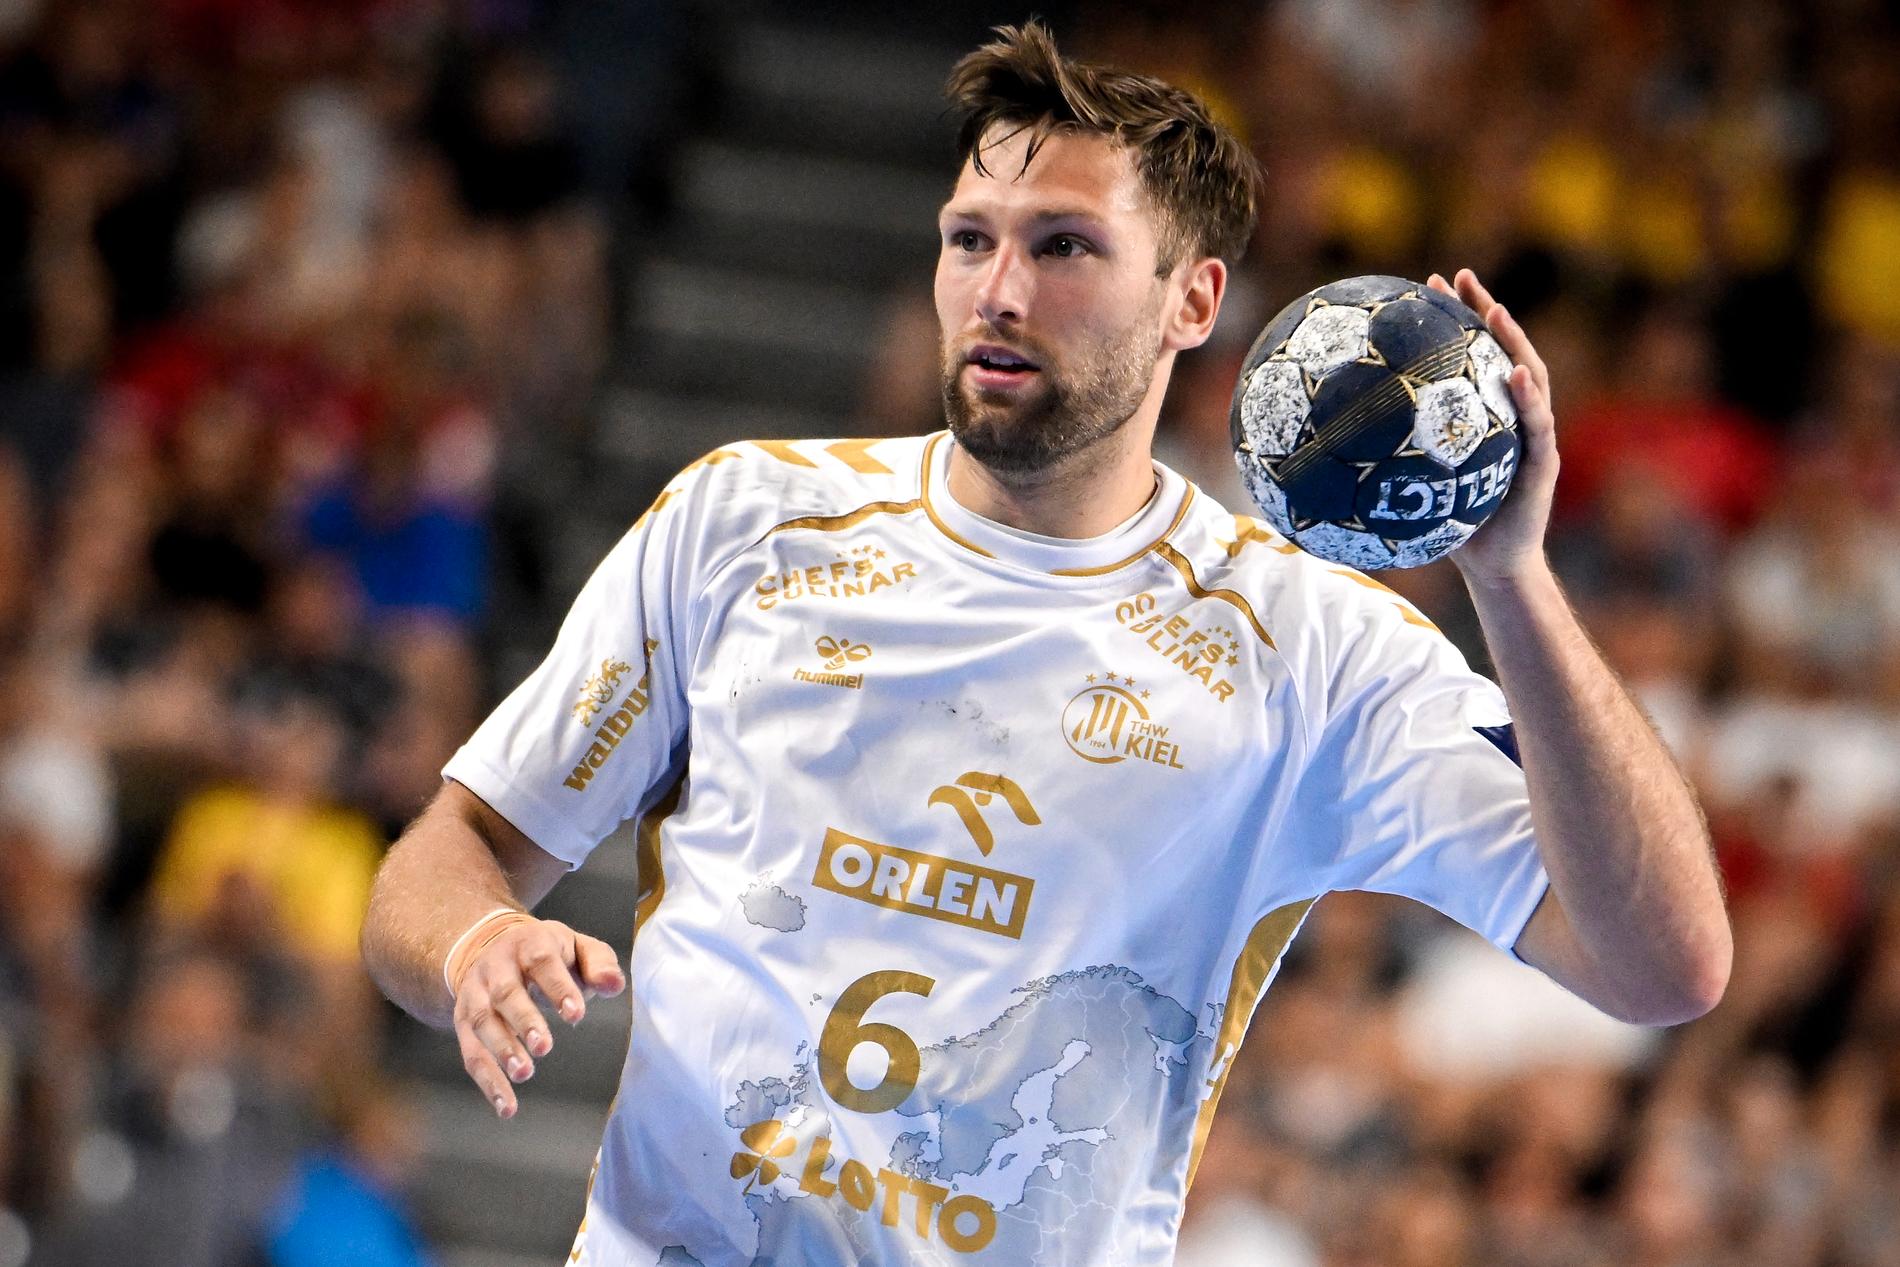 Harald Reinkind scores nine goals: Close to league gold in Germany